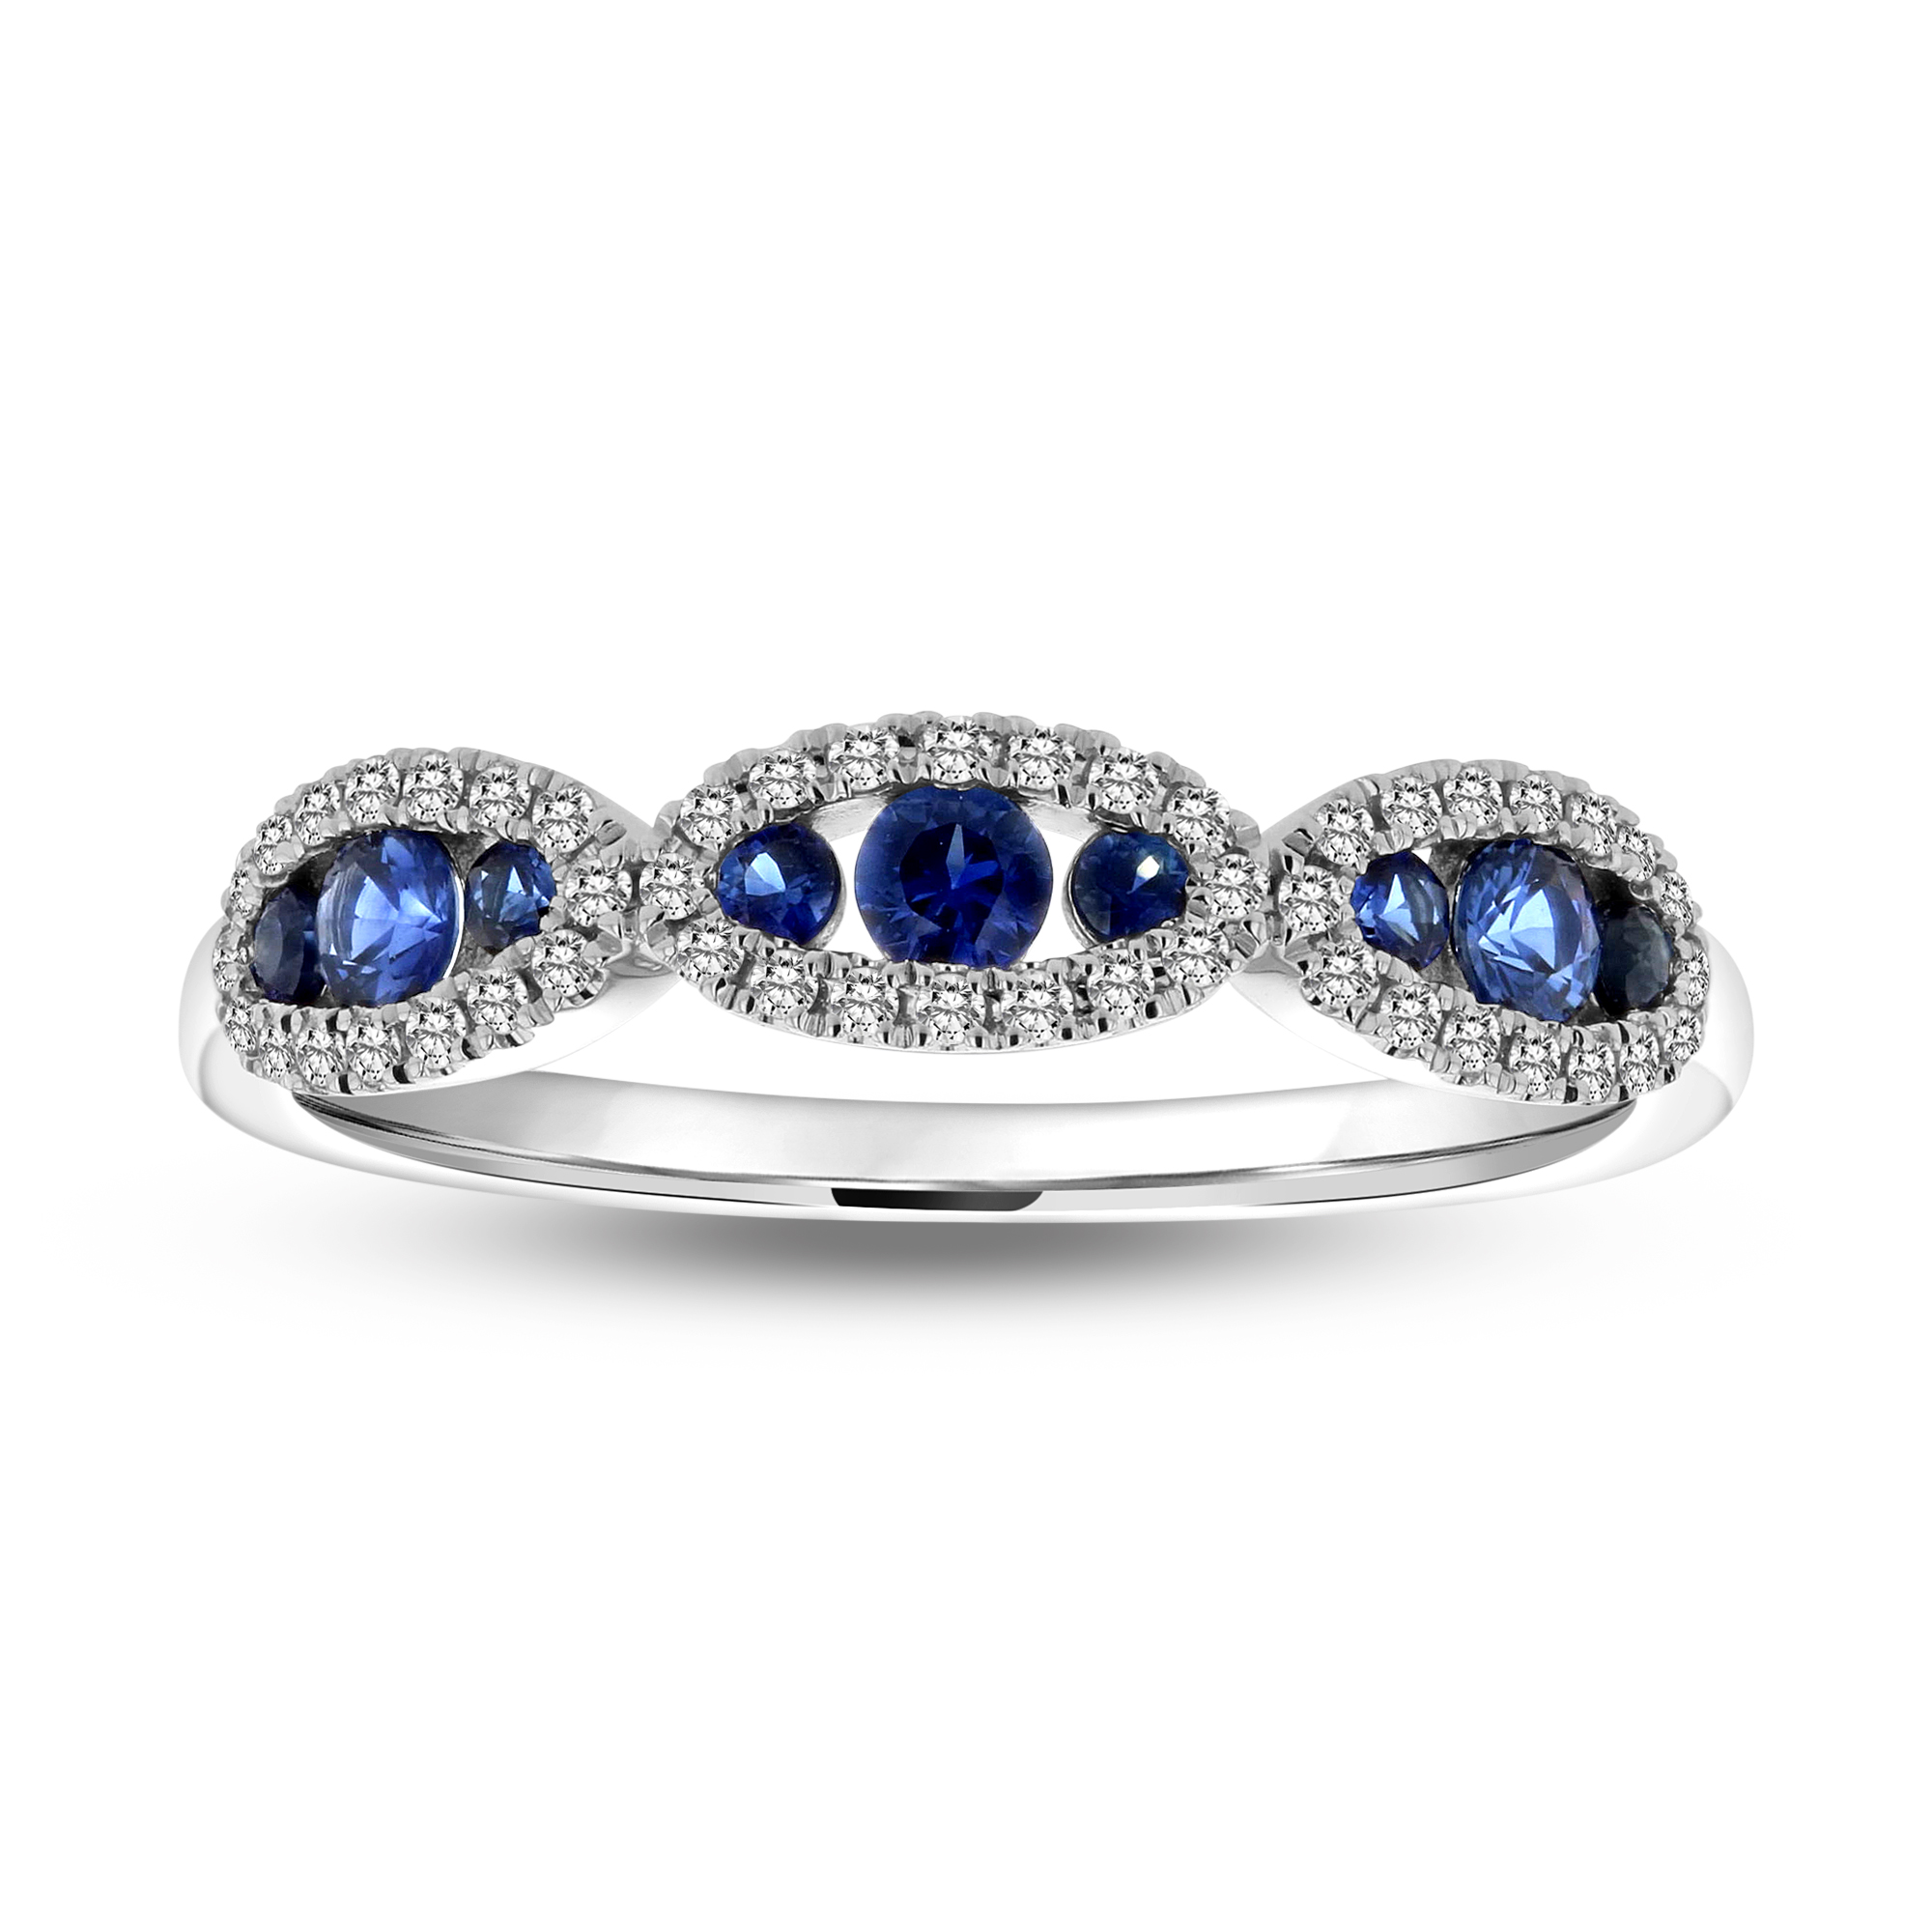 0.49ctw Diamond and Sapphire Band in 14k White Gold